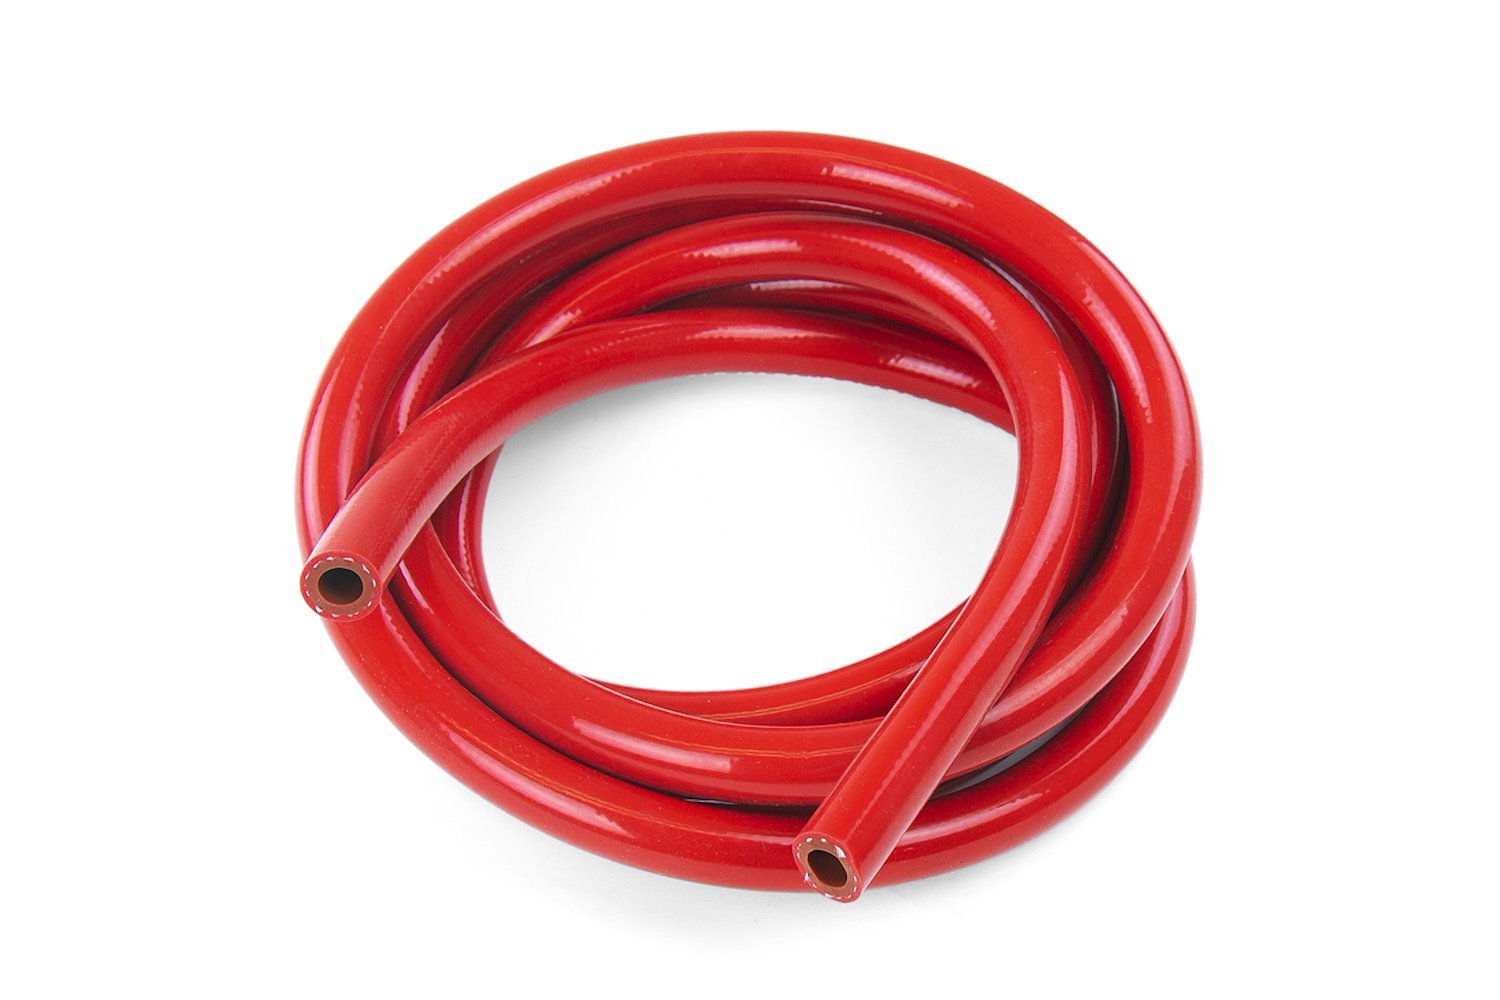 HTHH-062-REDx10 Silicone Heater Hose Tubing, High-Temp 1-Ply Reinforced, 5/8 in. ID, 10 ft. Roll, Red